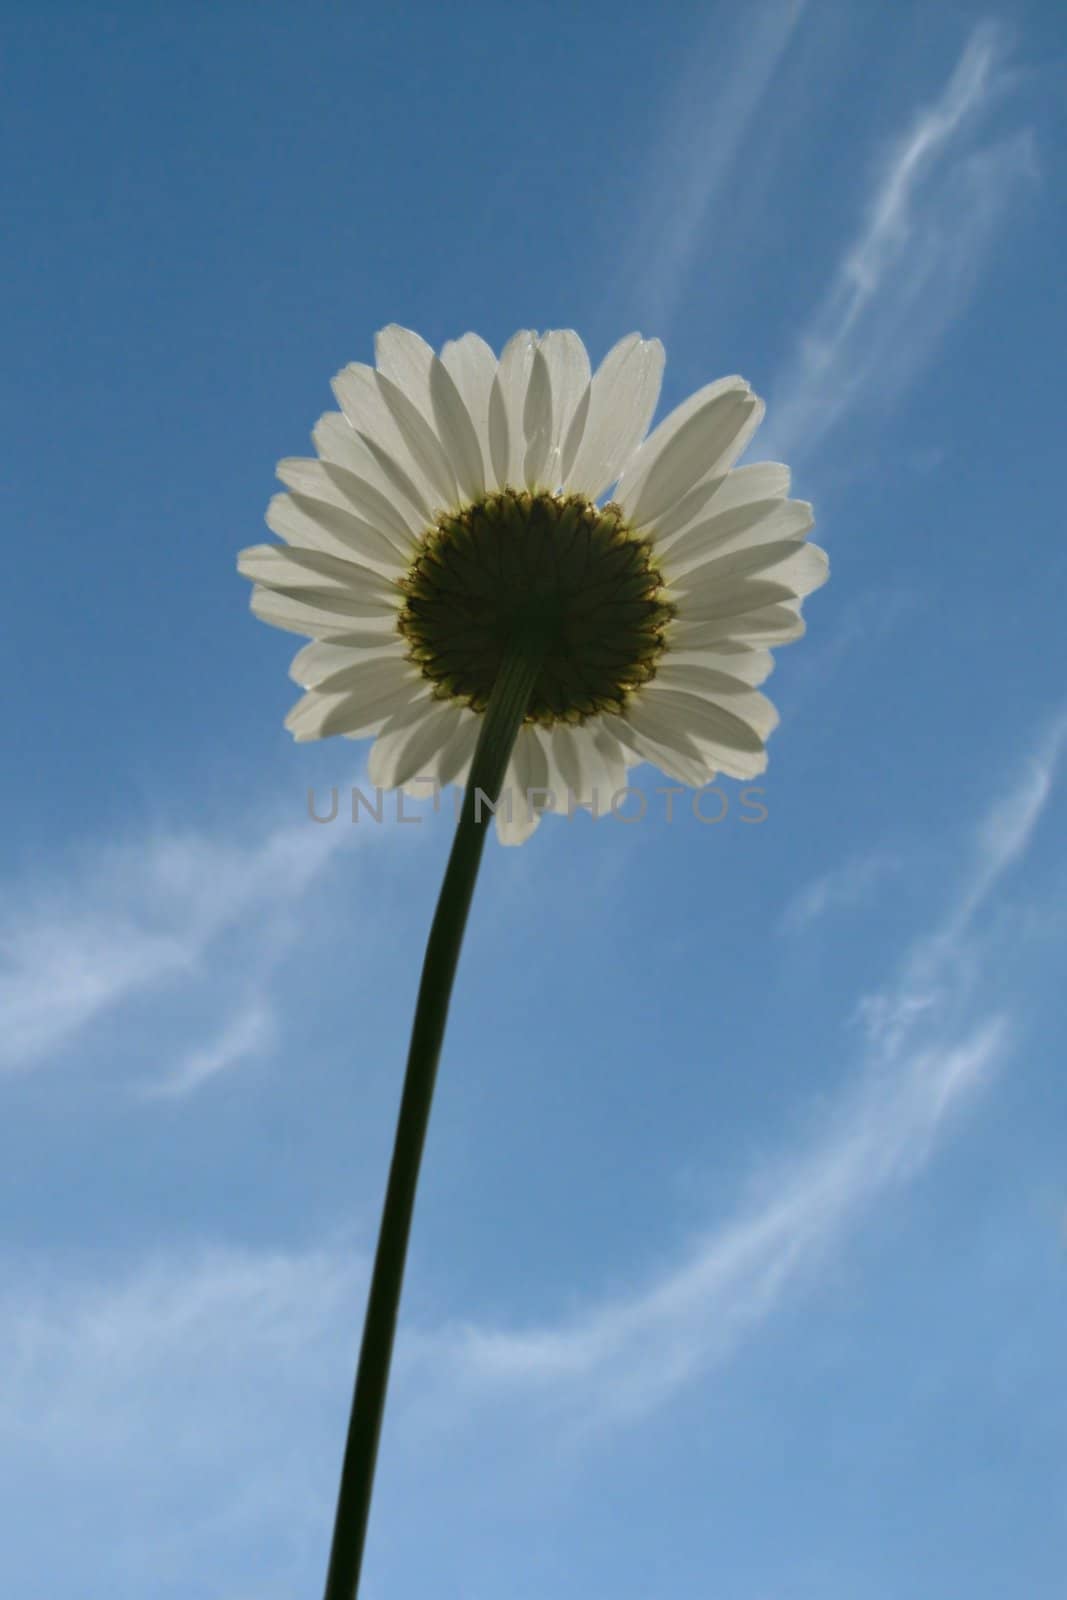 The back-lighted camomile against blue sky